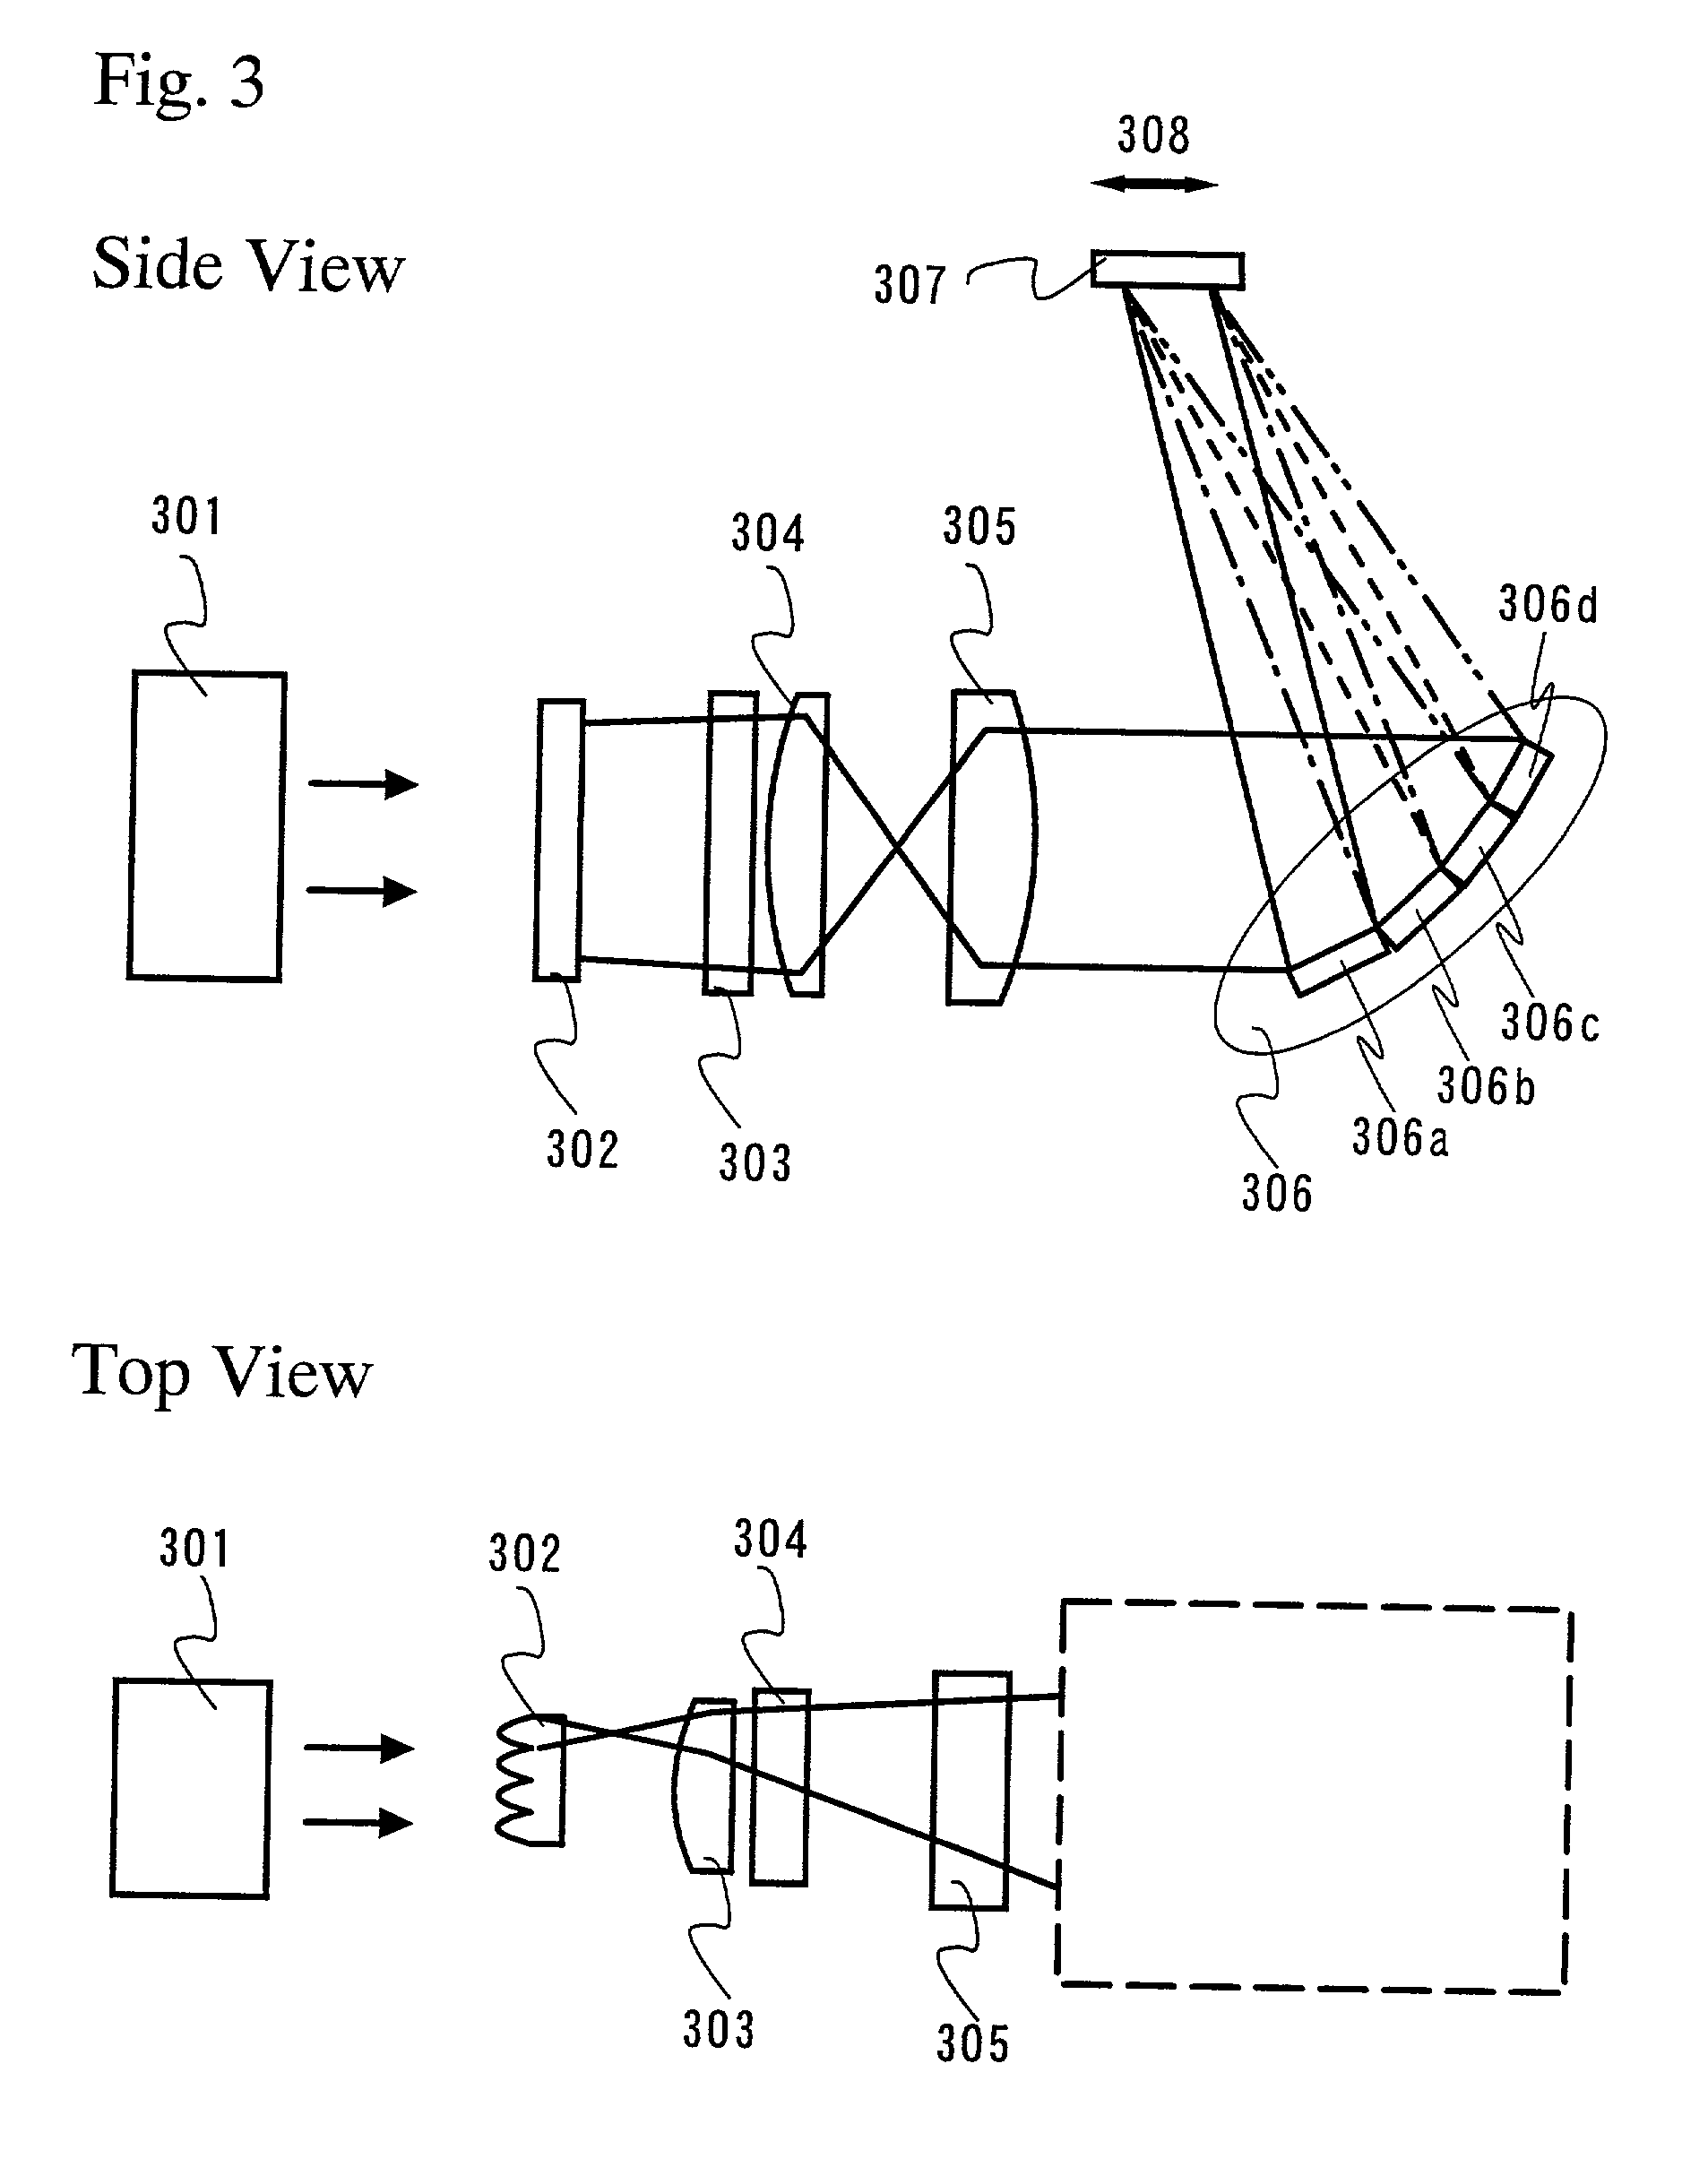 Laser irradiation apparatus and method of fabricating a semiconductor device